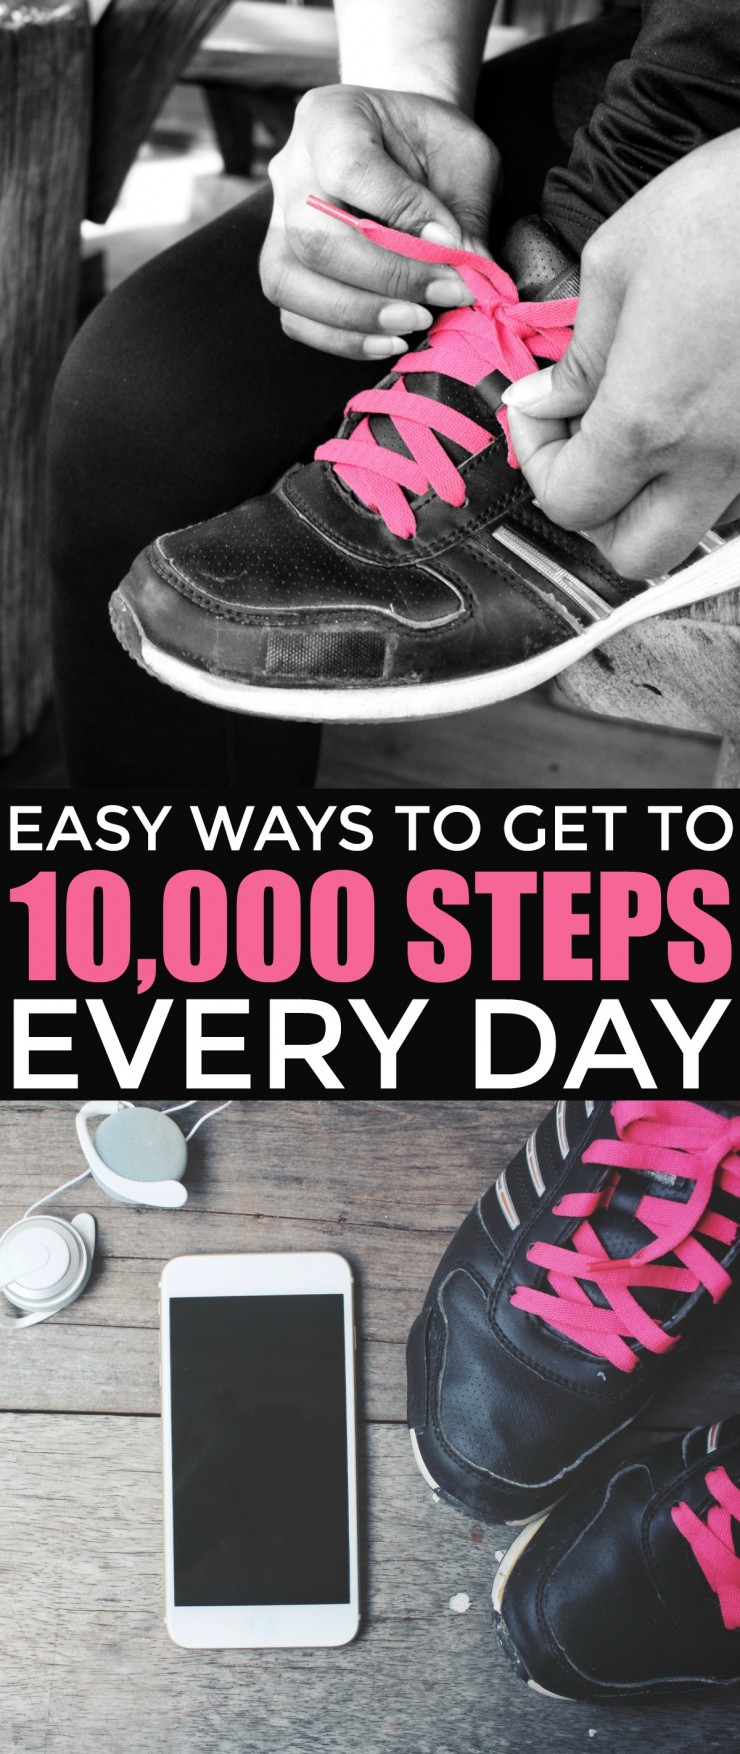 Easy ways to get to 10,000 Steps Every Day to live a healthier lifestyle. Ten thousand steps is a great daily fitness goal that can help you burn an extra 500 calories a day!